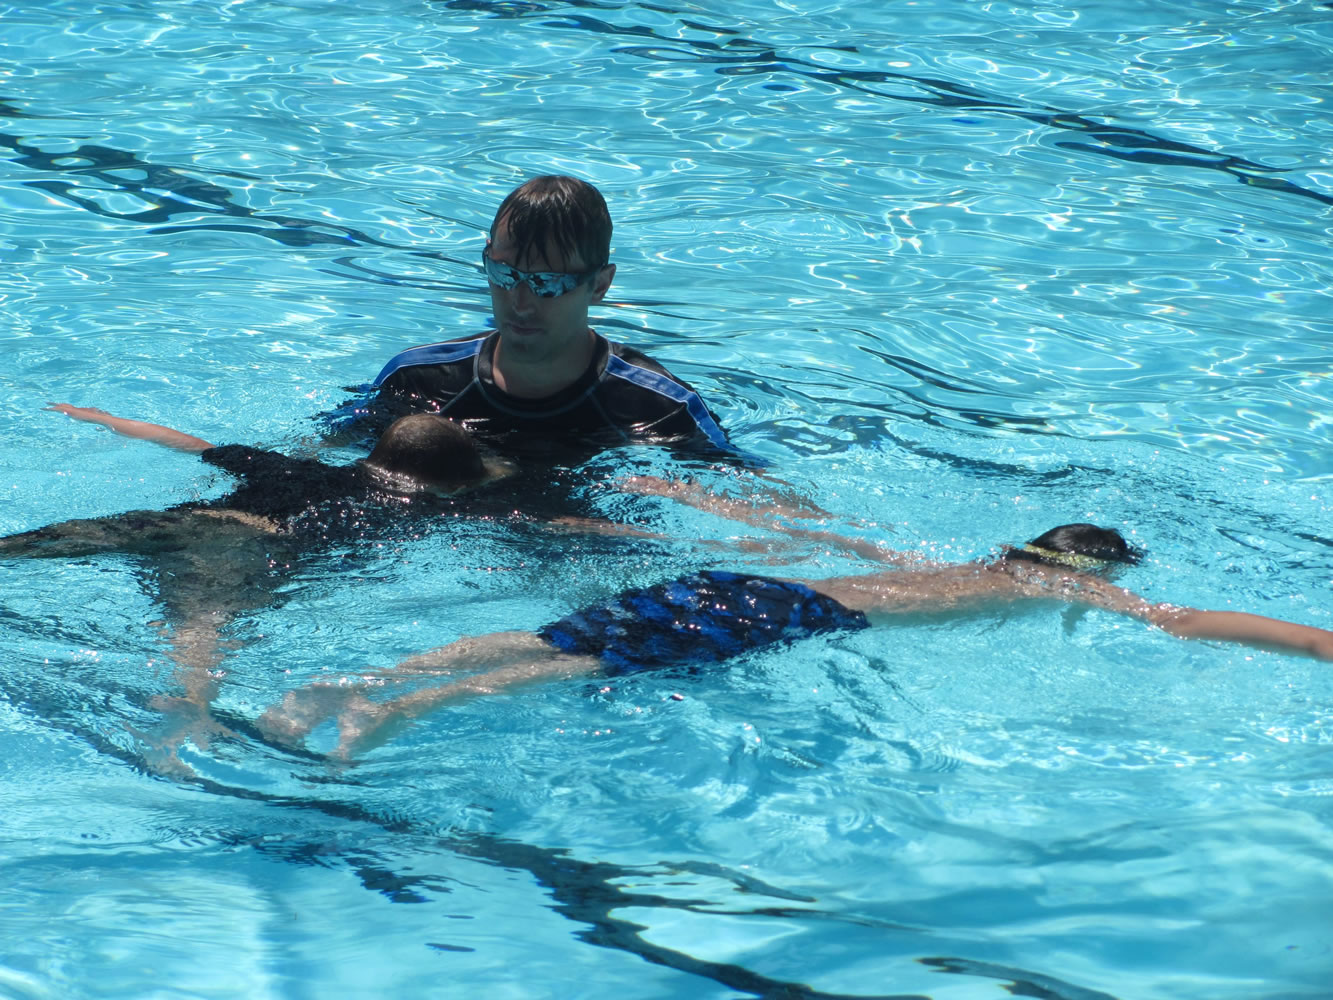 File photo
Several swim camps, from beginner to lifeguard training, are found at the Camas Municipal Pool during the summer.